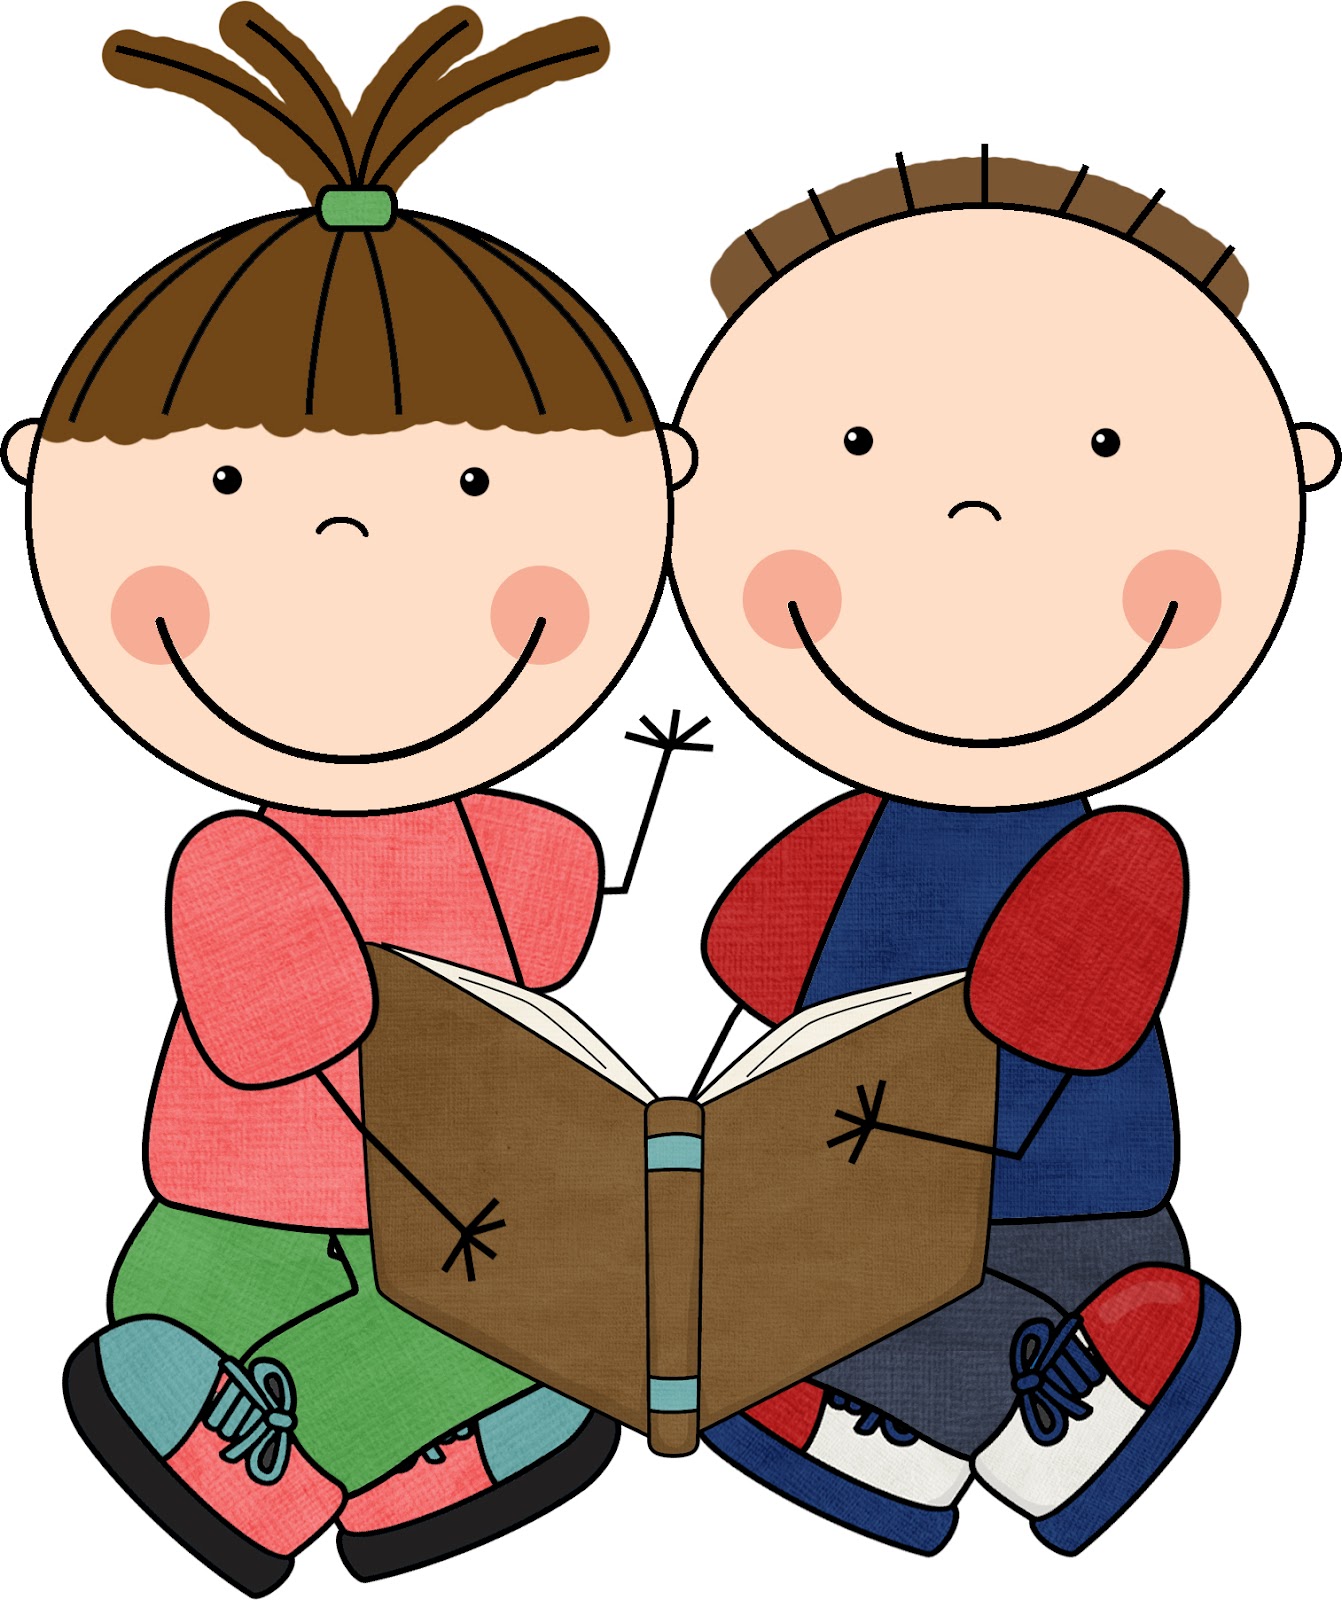 Picture Books For Children | Clipart Panda - Free Clipart Images